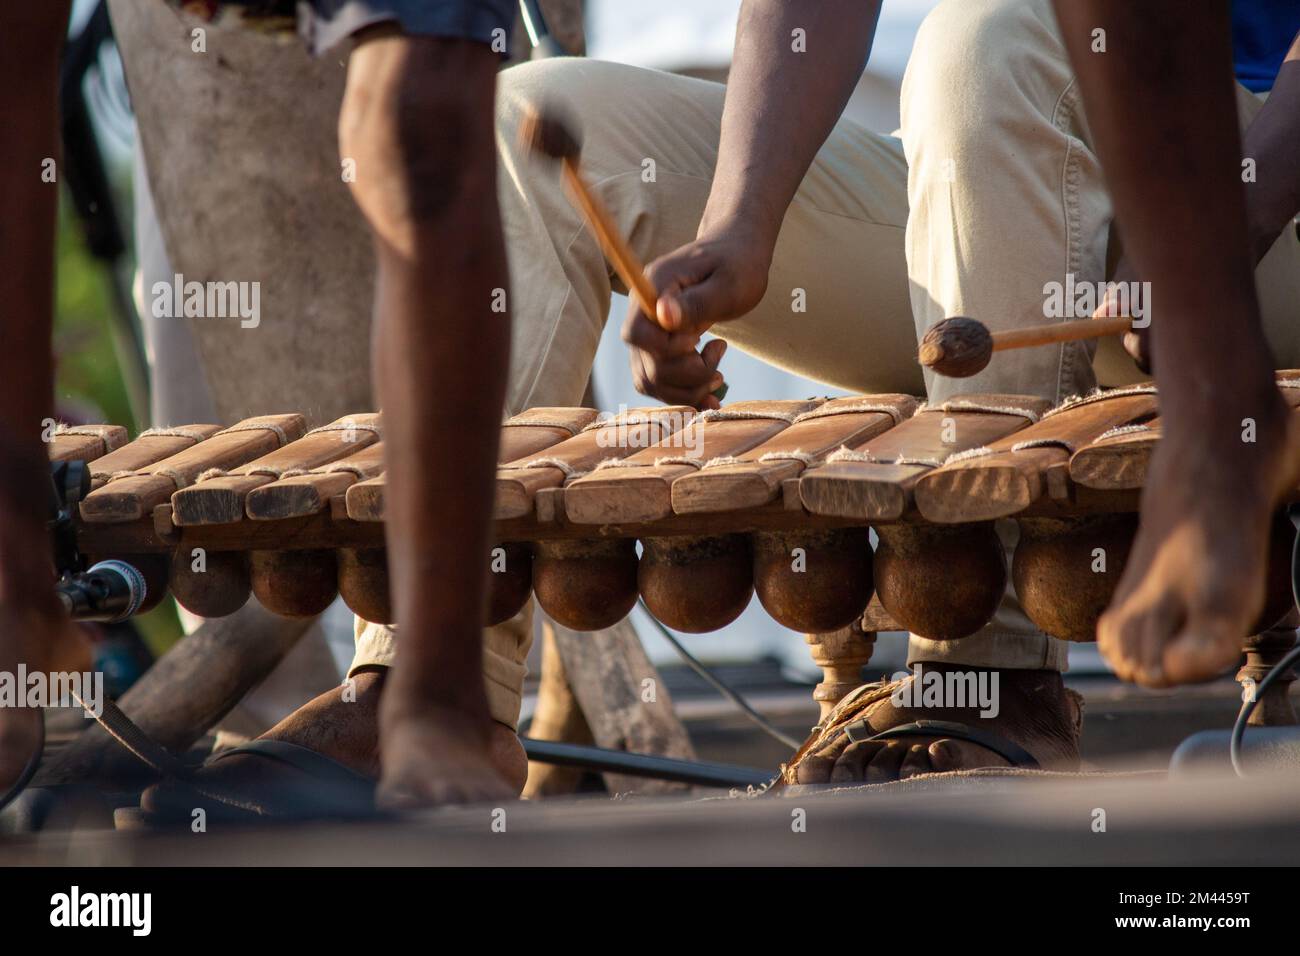 People dancing to traditional cultural heritage Mozambican wood xylophone like instrument known as timbila or mbila played with rubber drum sticks Stock Photo